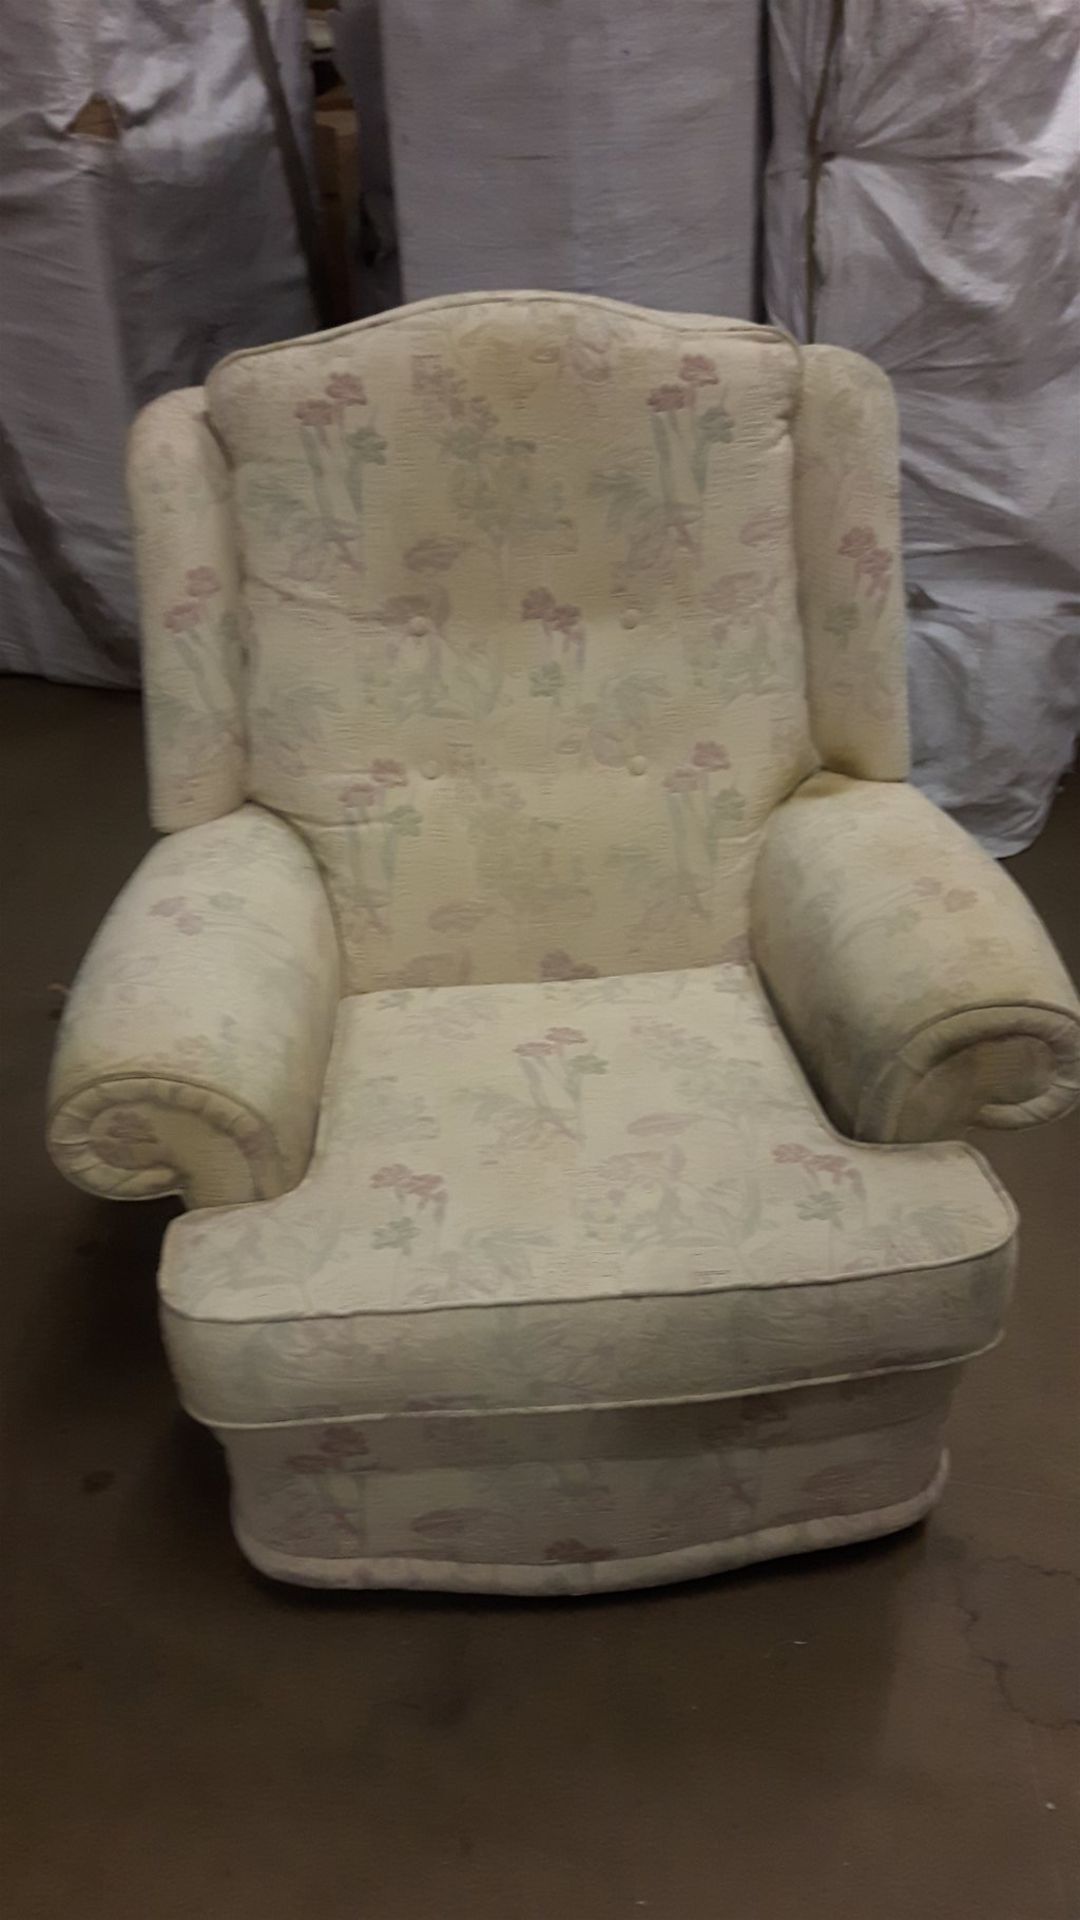 Single armchair in a cream and floral design.